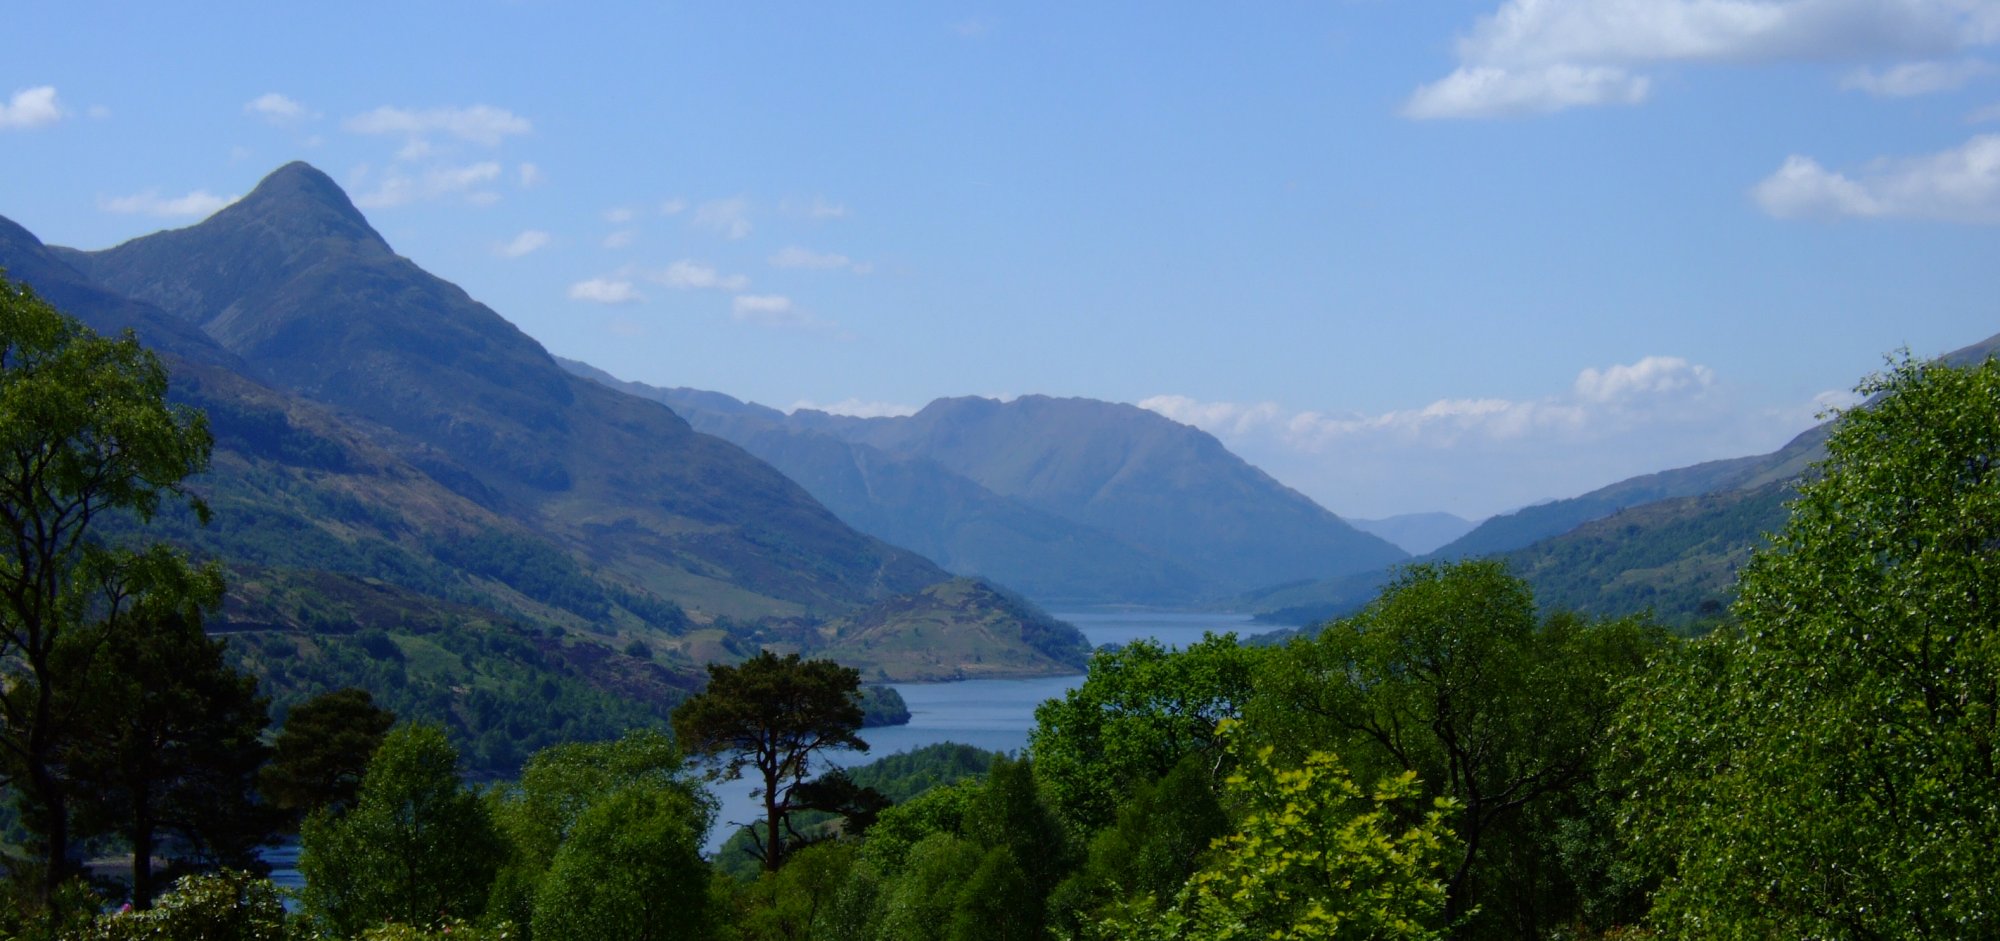 The view down Loch Leven. The Pap of Glencoe and Sgorr Dhearg on the left and Beinn na Caillich on the right